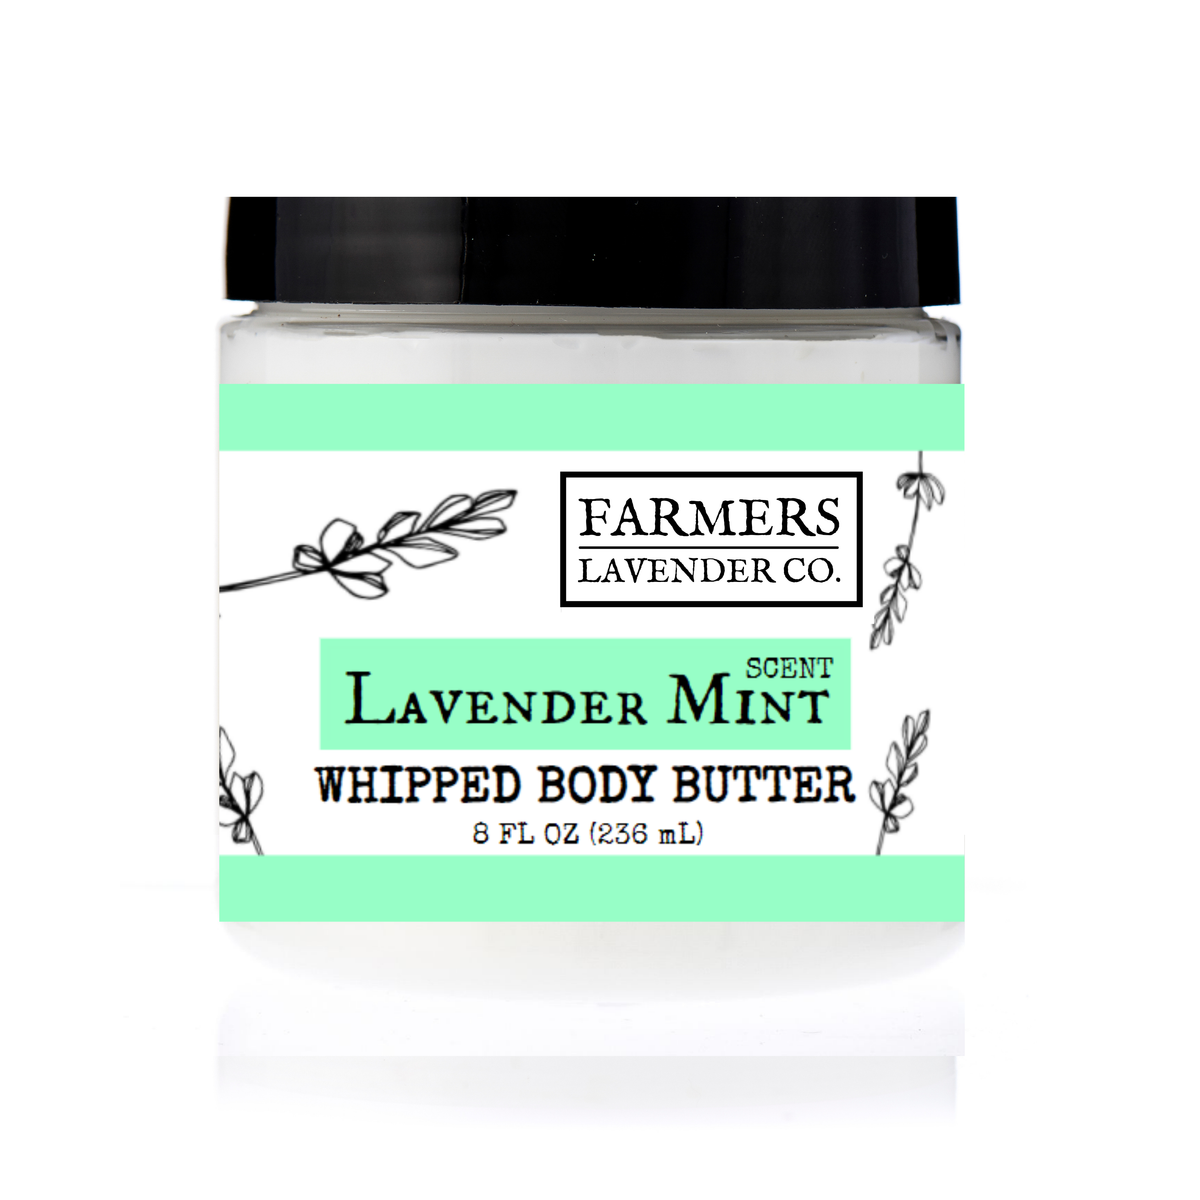 FARMERS Lavender Co. - Lavender Mint Whipped Body Butter